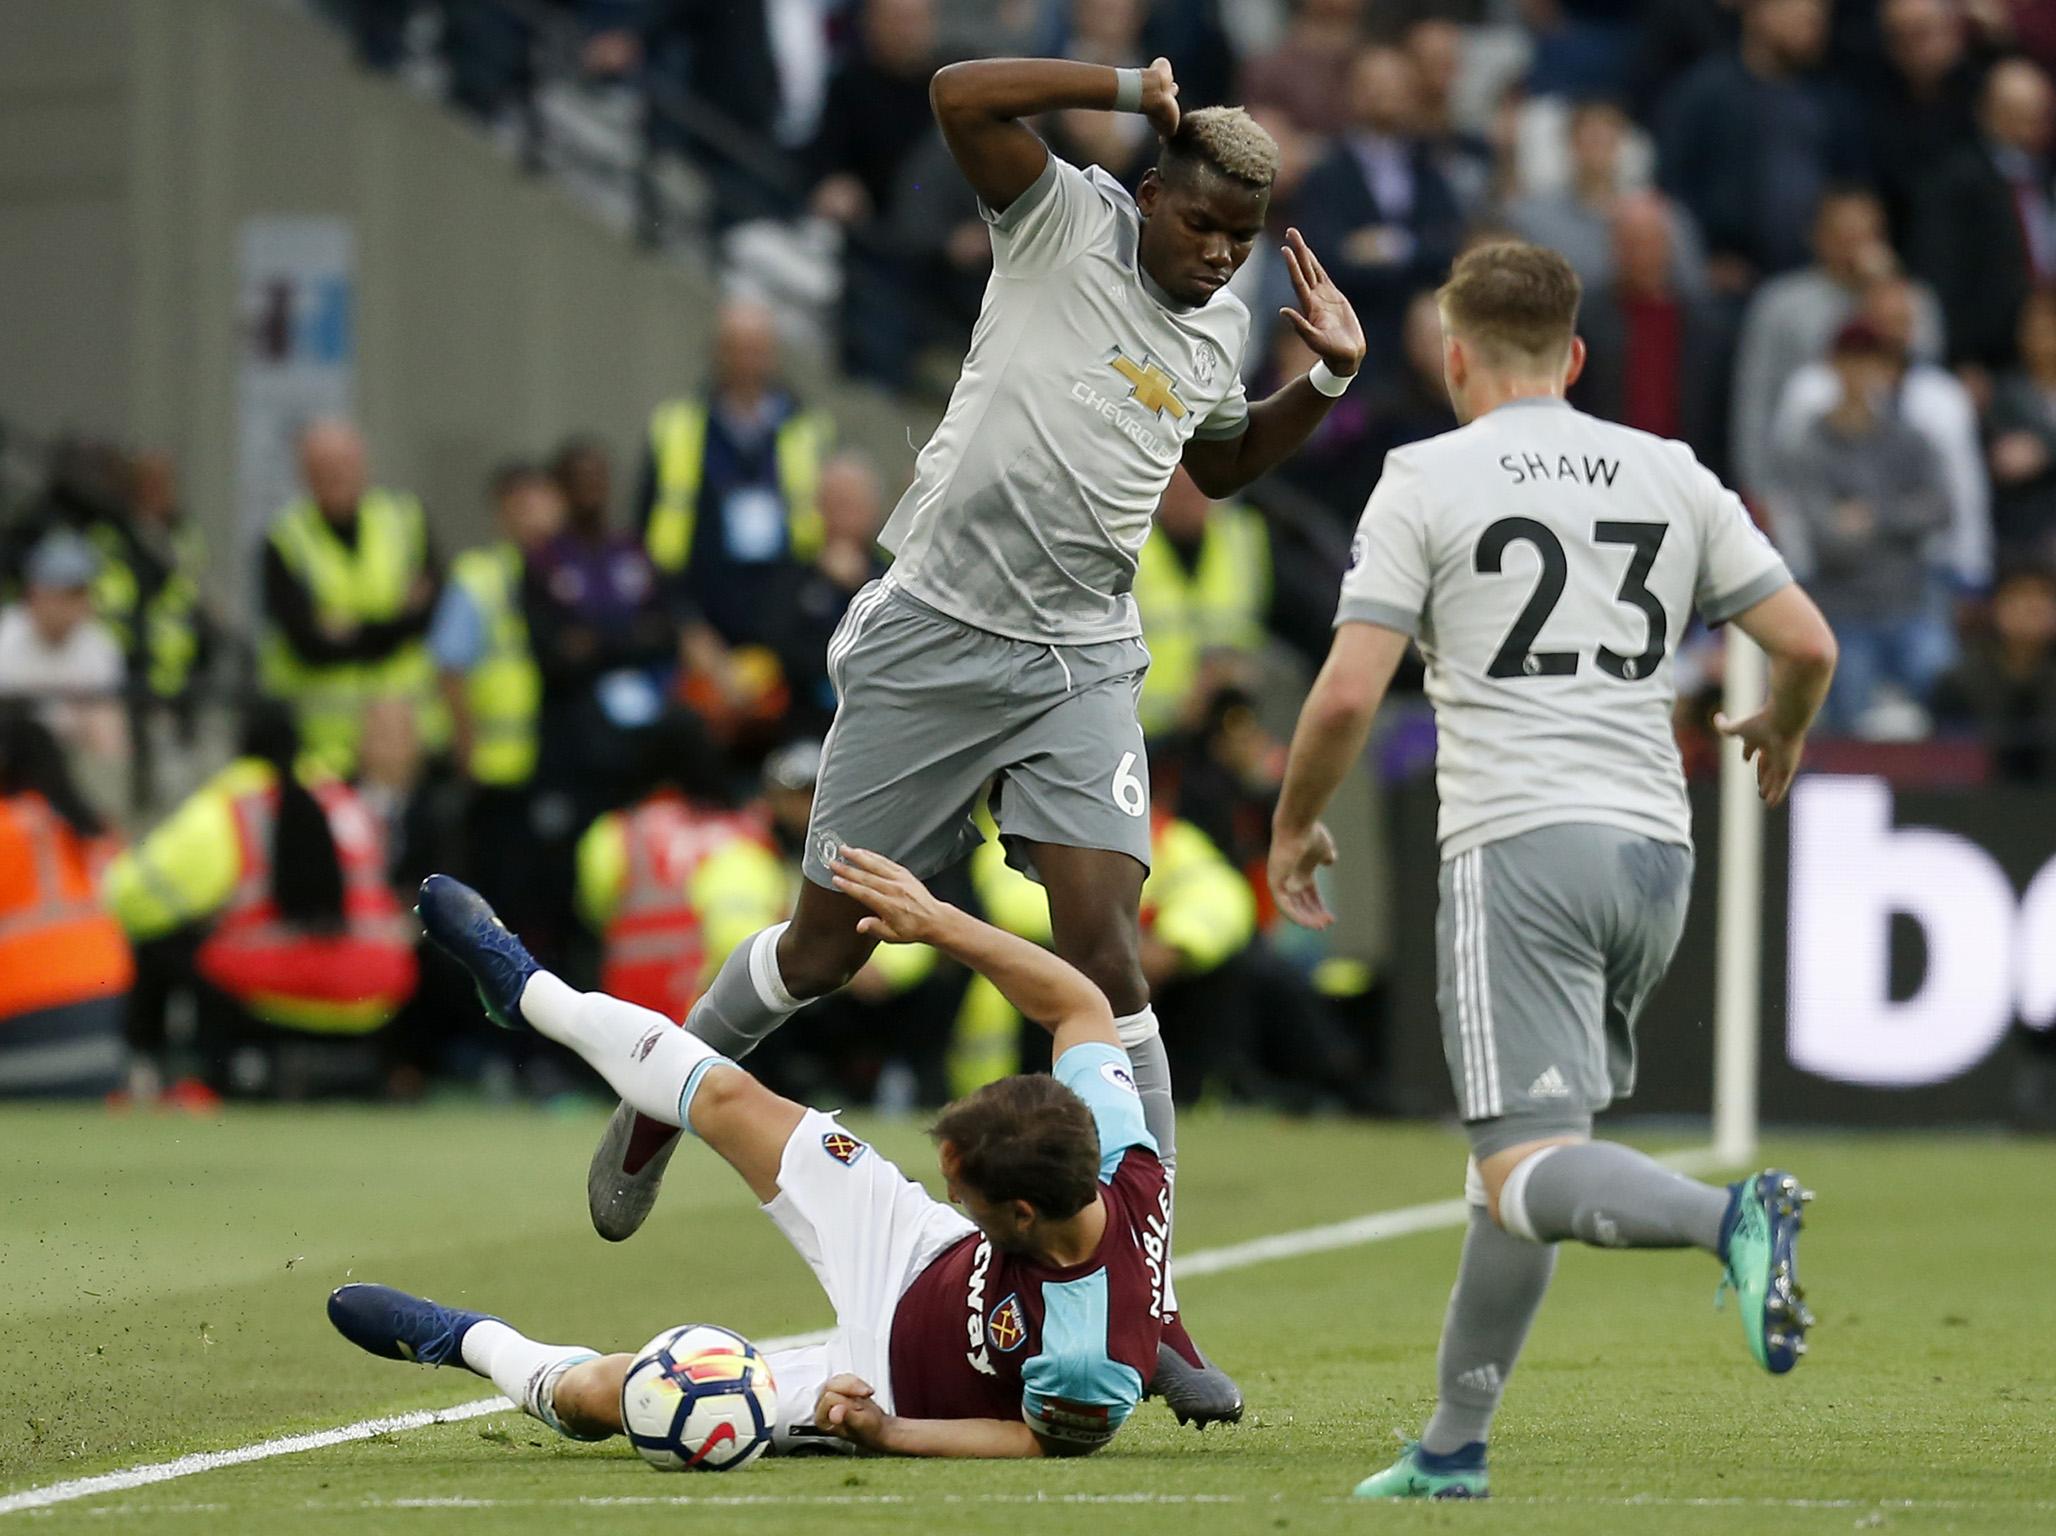 West Ham And Manchester United Play Out Dreary Premier League Stalemate The Independent The